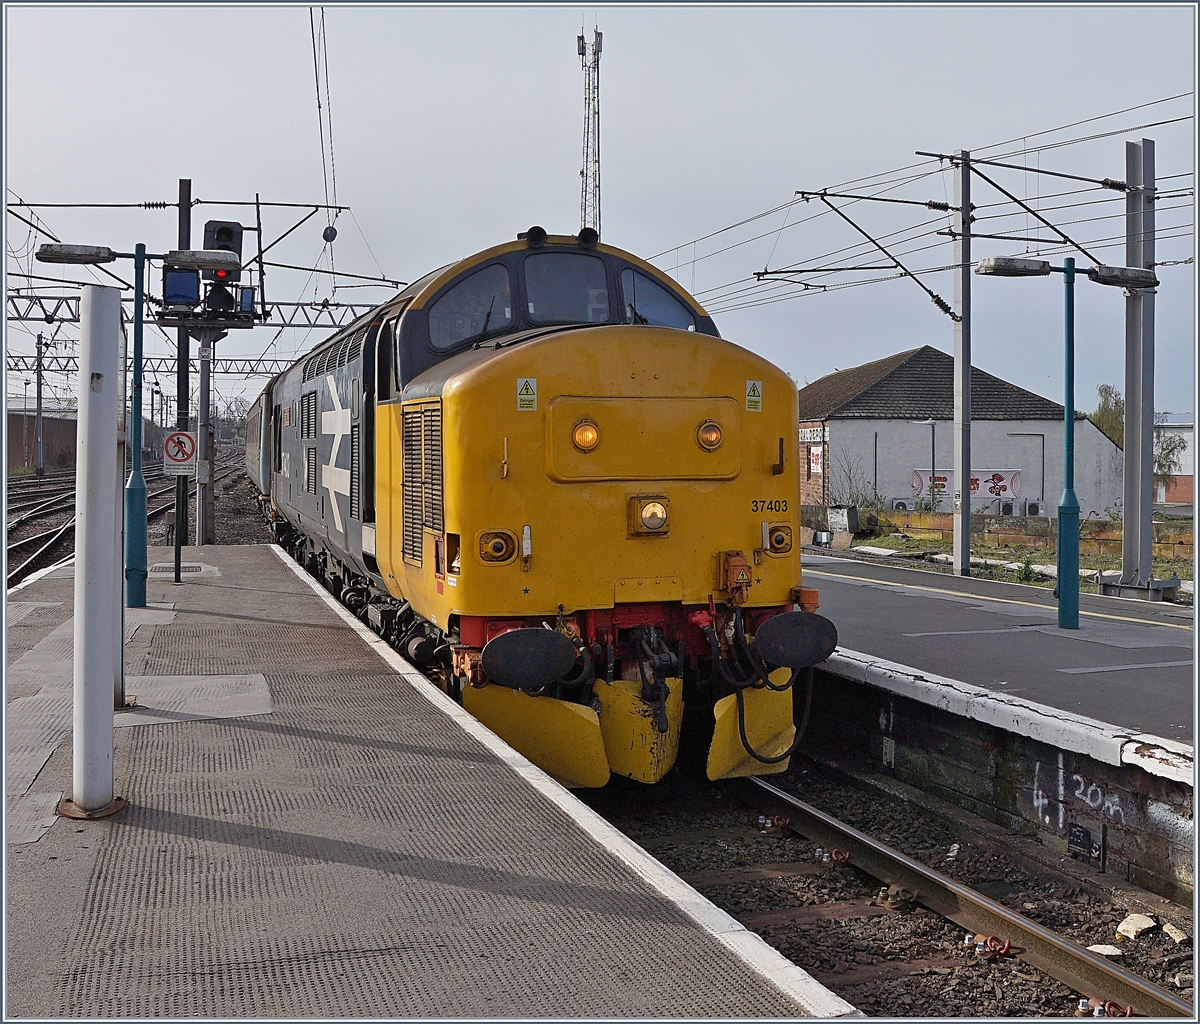 The 37 403 arrives at Carlisle station. The Class 37 is a diesel-electric passenger and freight locomotive that was delivered between 1960 and 1965 by English Electric and Robert Stephenson and Hawthorns. 309 units were built and the locomotive was initially put into operation as the EE3. Shortly before the turn of the millennium, the Class 37 was increasingly dispensed with.

April 25, 2018